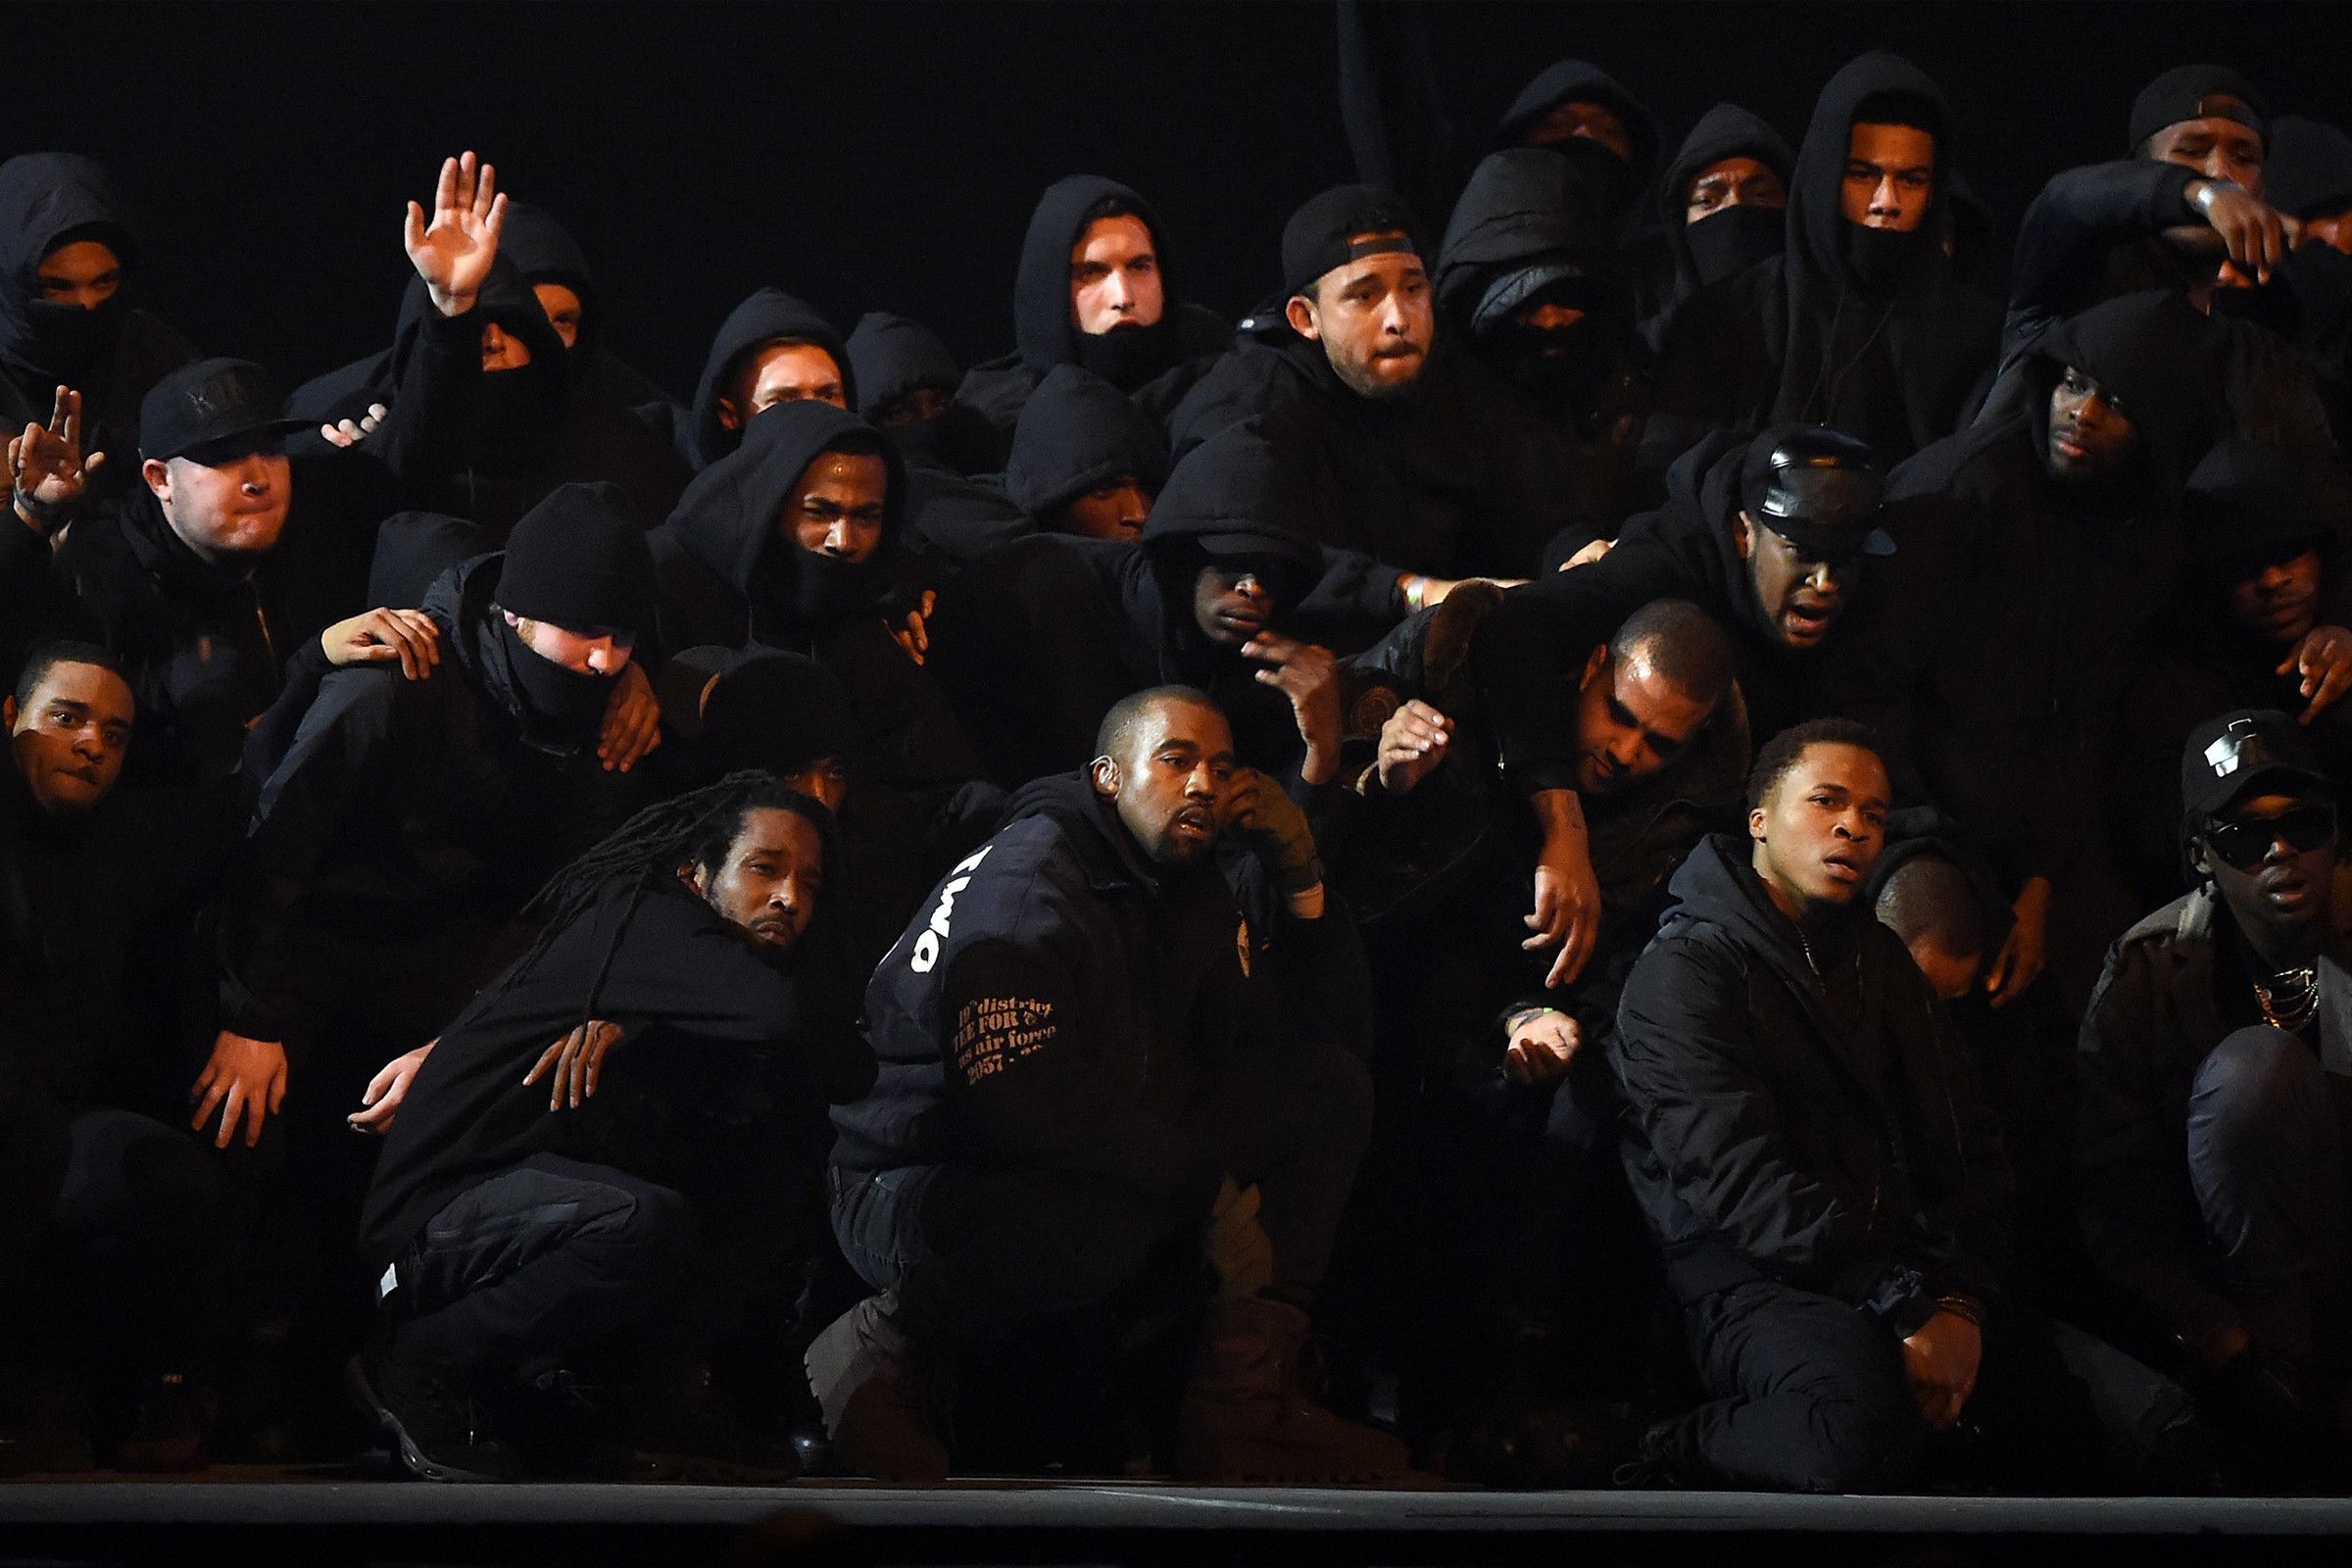 Kanye West performing "All Day" at the 2015 BRIT Awards